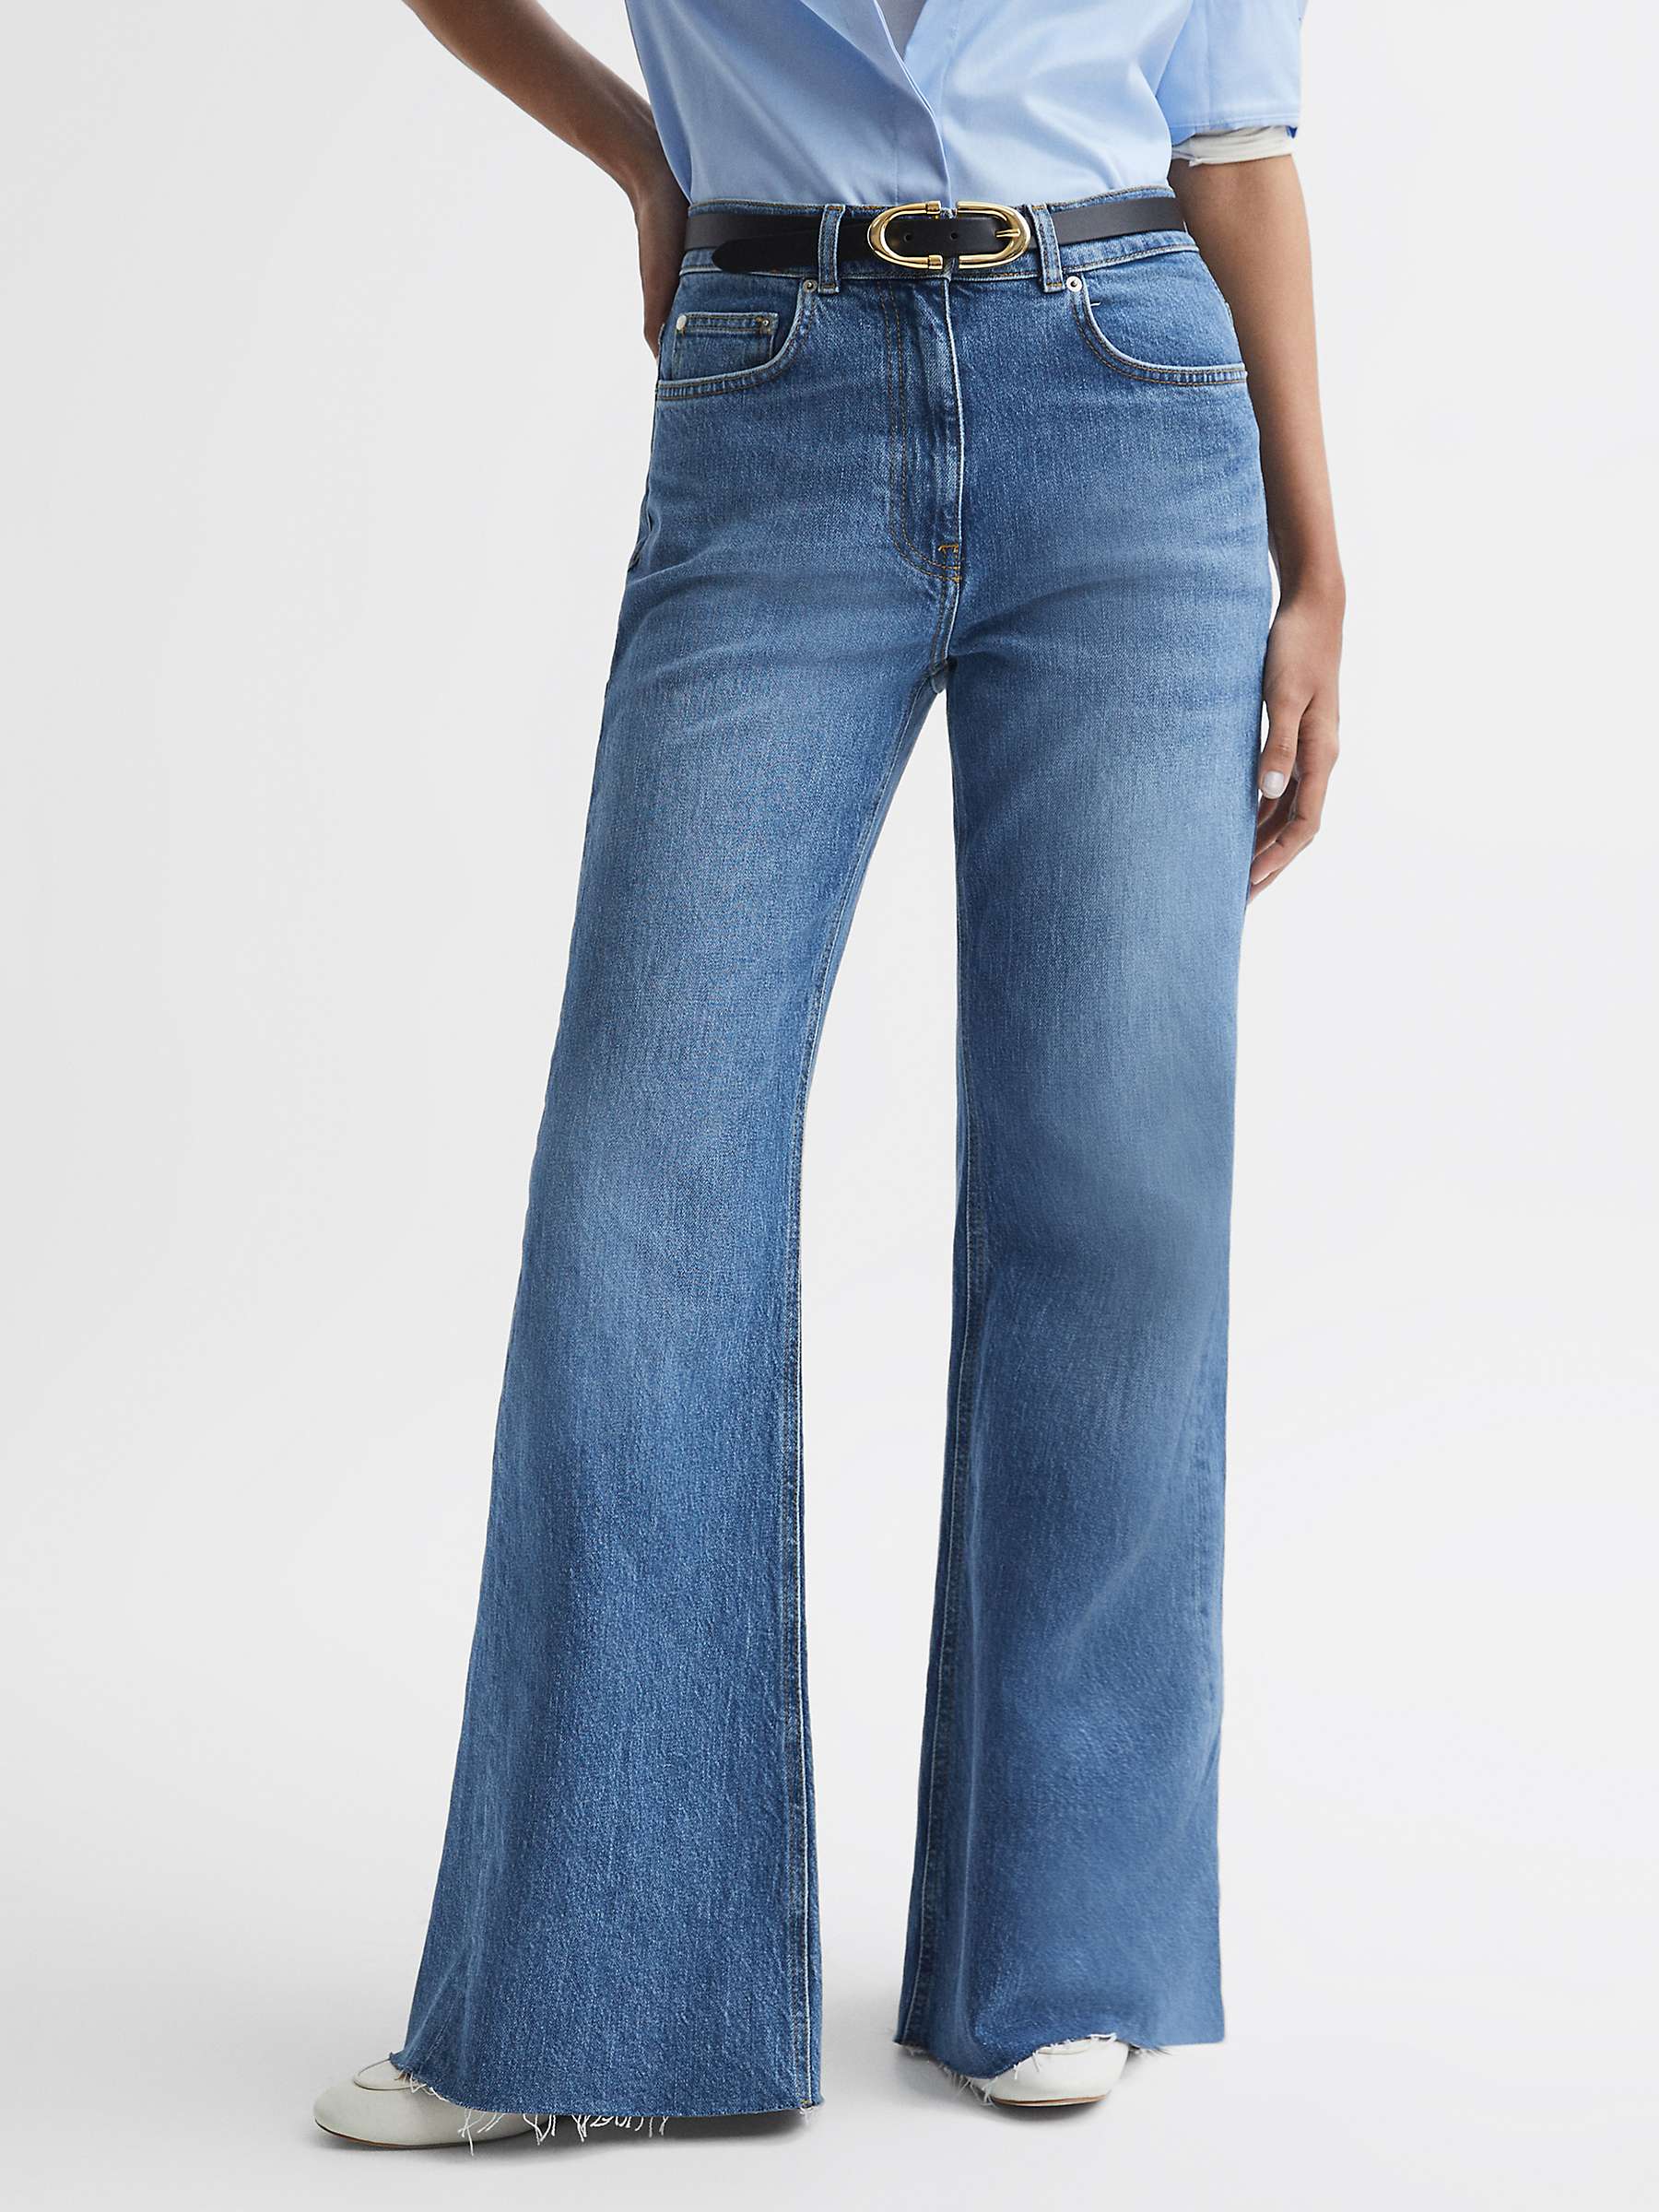 Buy Reiss Calla Mid Rise Wide Leg Jeans, Mid Blue Online at johnlewis.com